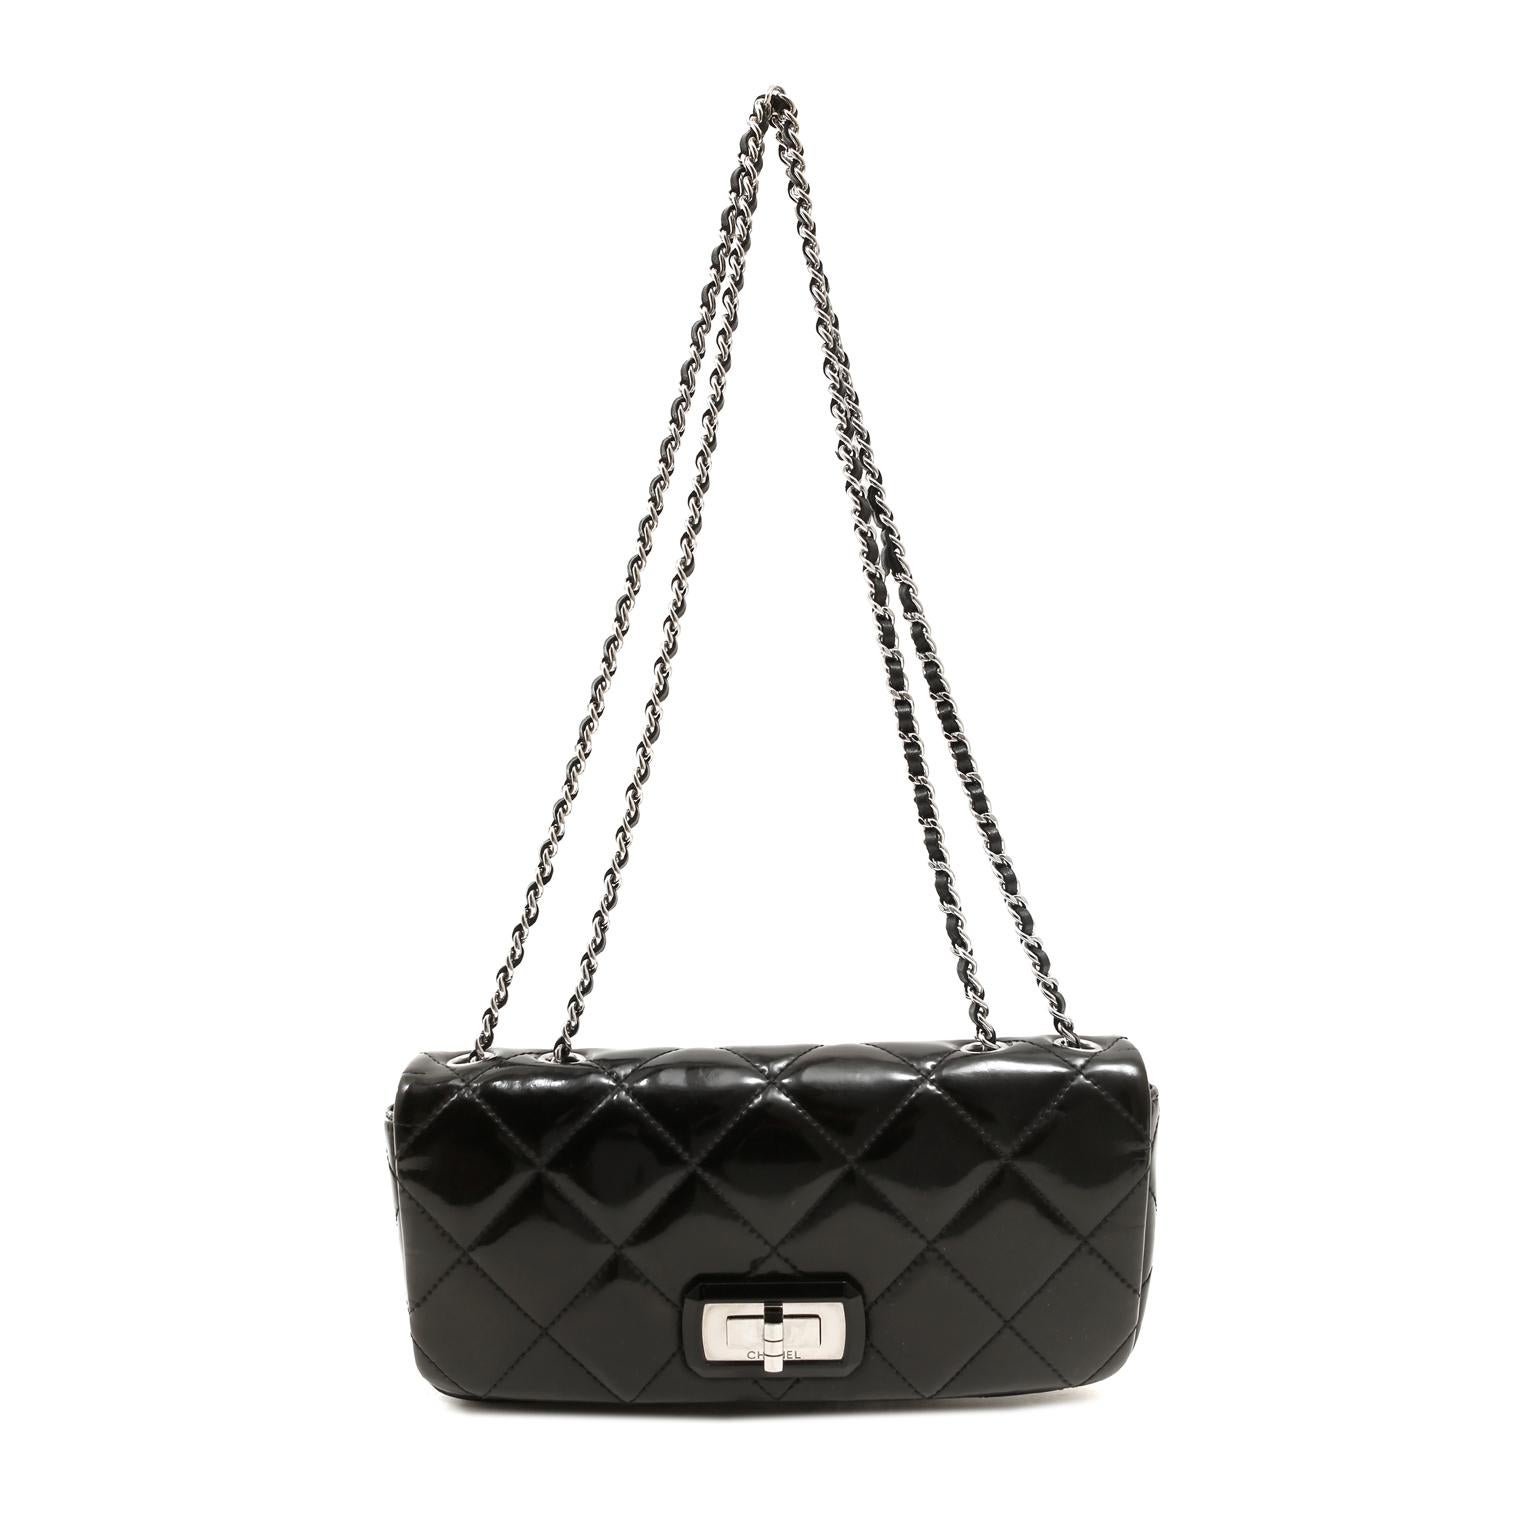 Chanel Black Patent Leather East West Reissue Flap Bag For Sale 3